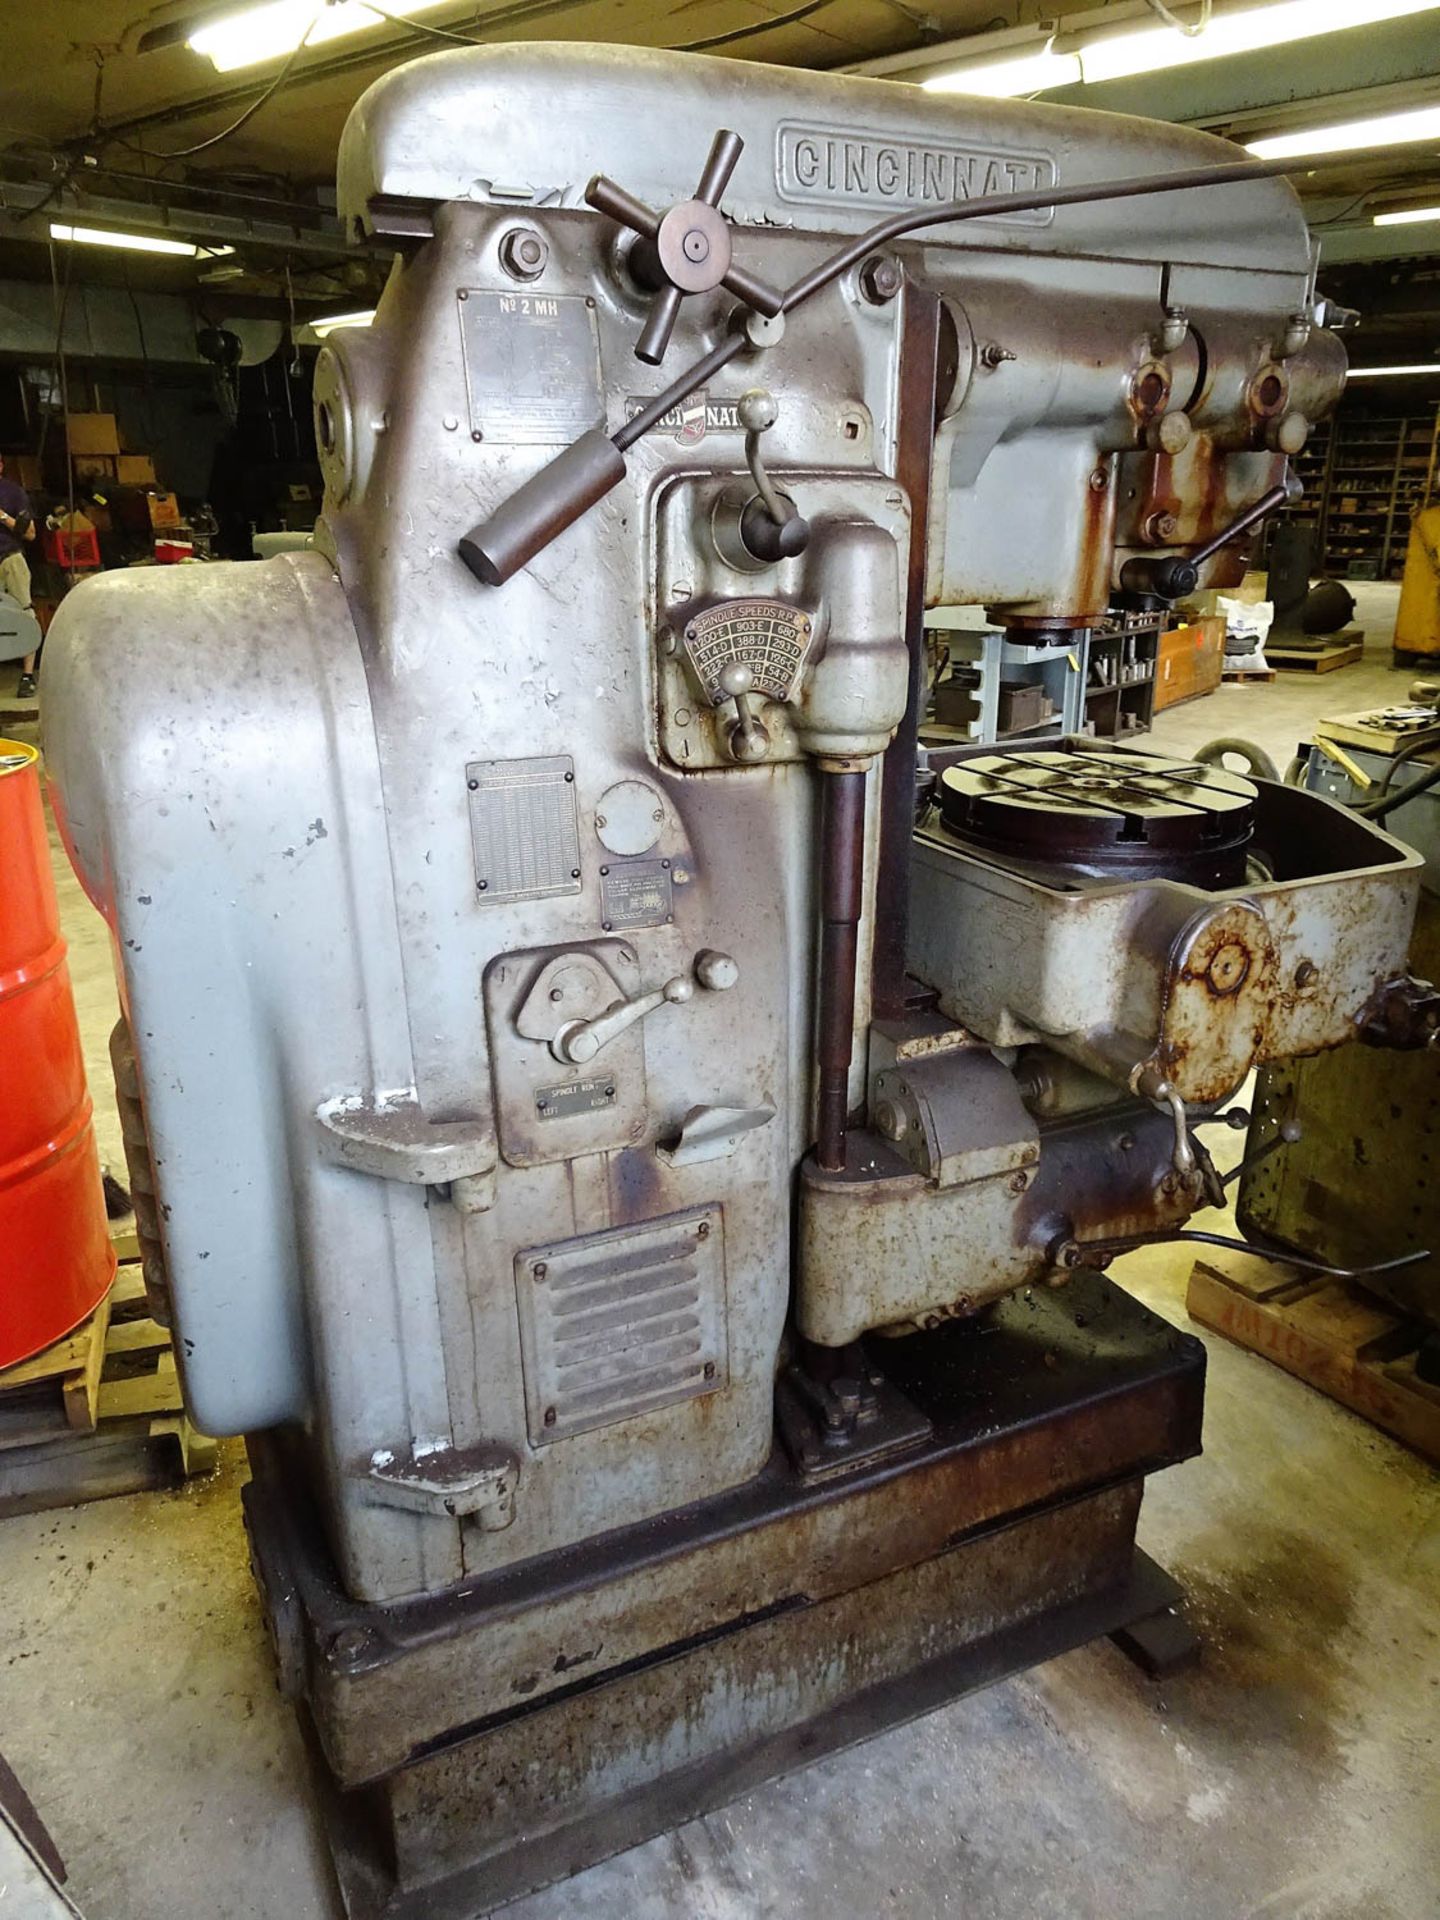 CINCINNATI MDL. NO. 2MH VERTICAL MILLING MACHINE, WITH ROTARY TABLE, VARIABLE SPEED, S/N 5A2P1H-13 - Image 2 of 4